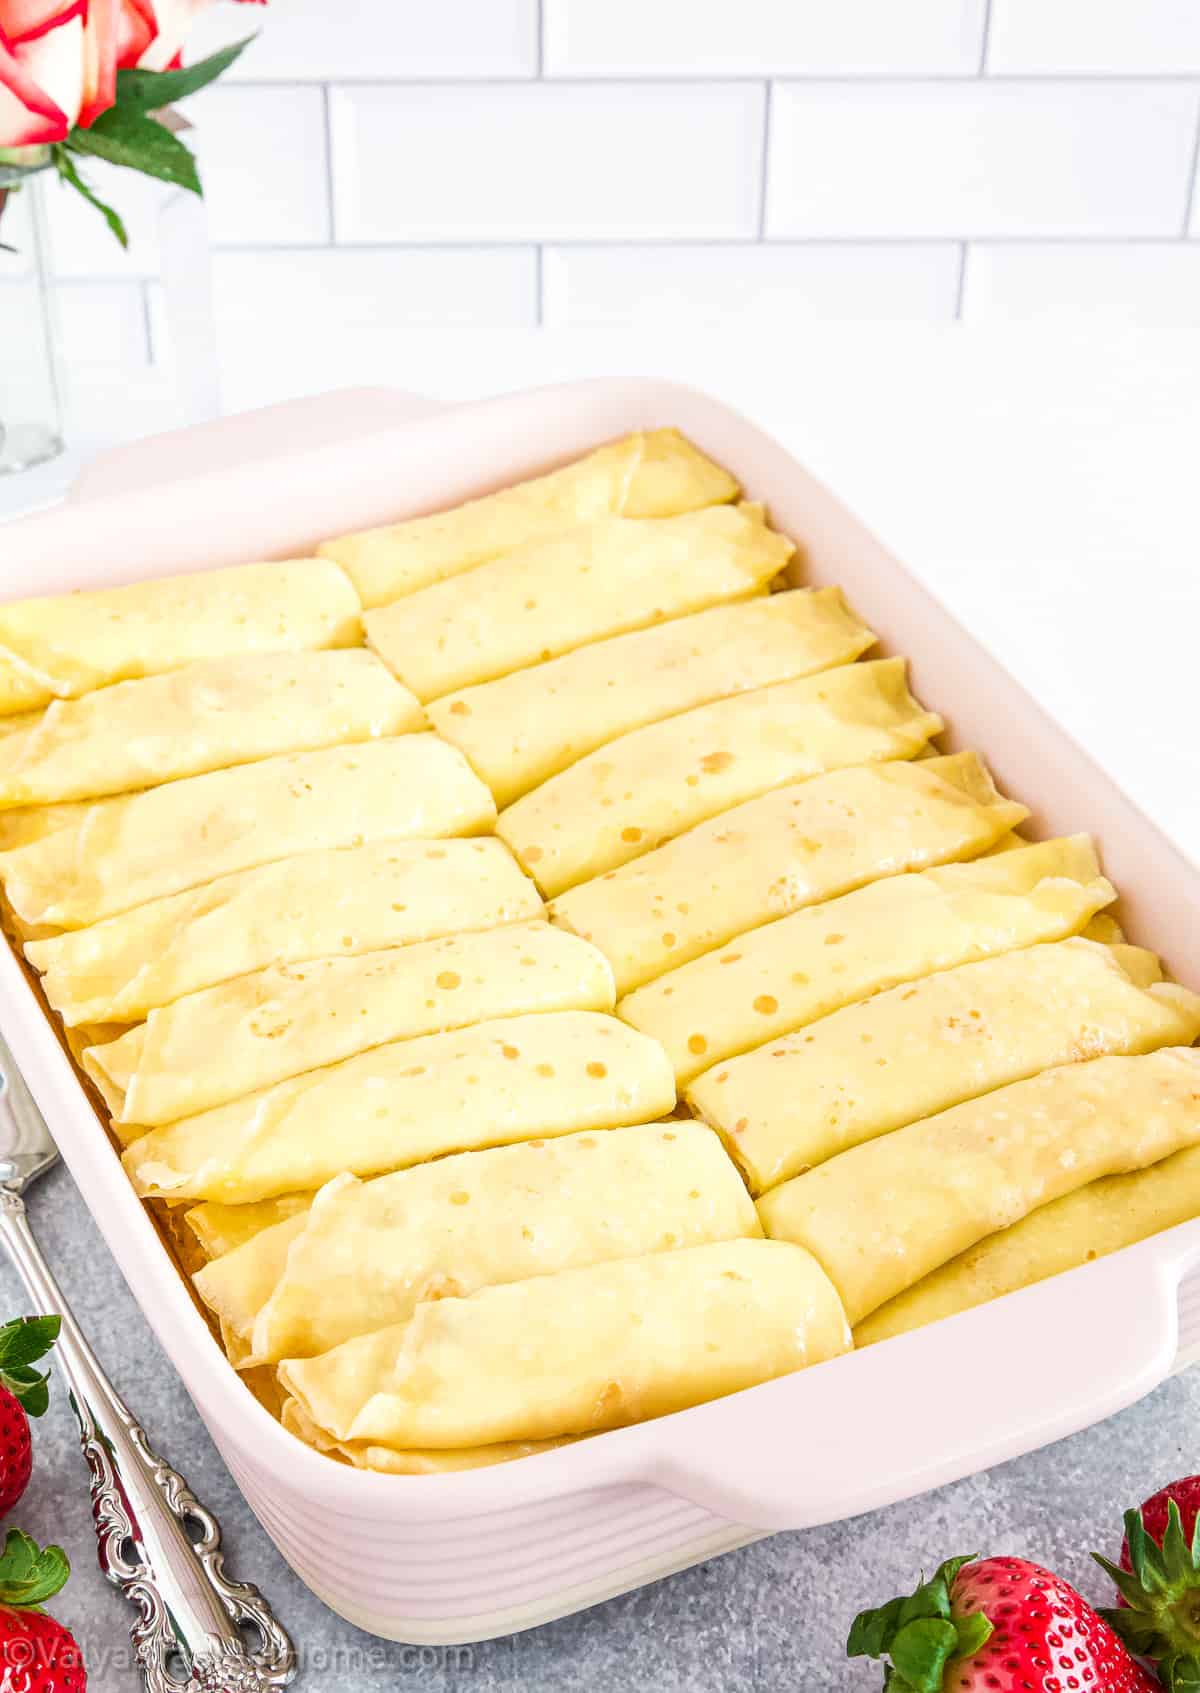 Remove from the oven once they're done. Your delicious Nalisniki is ready to be served!